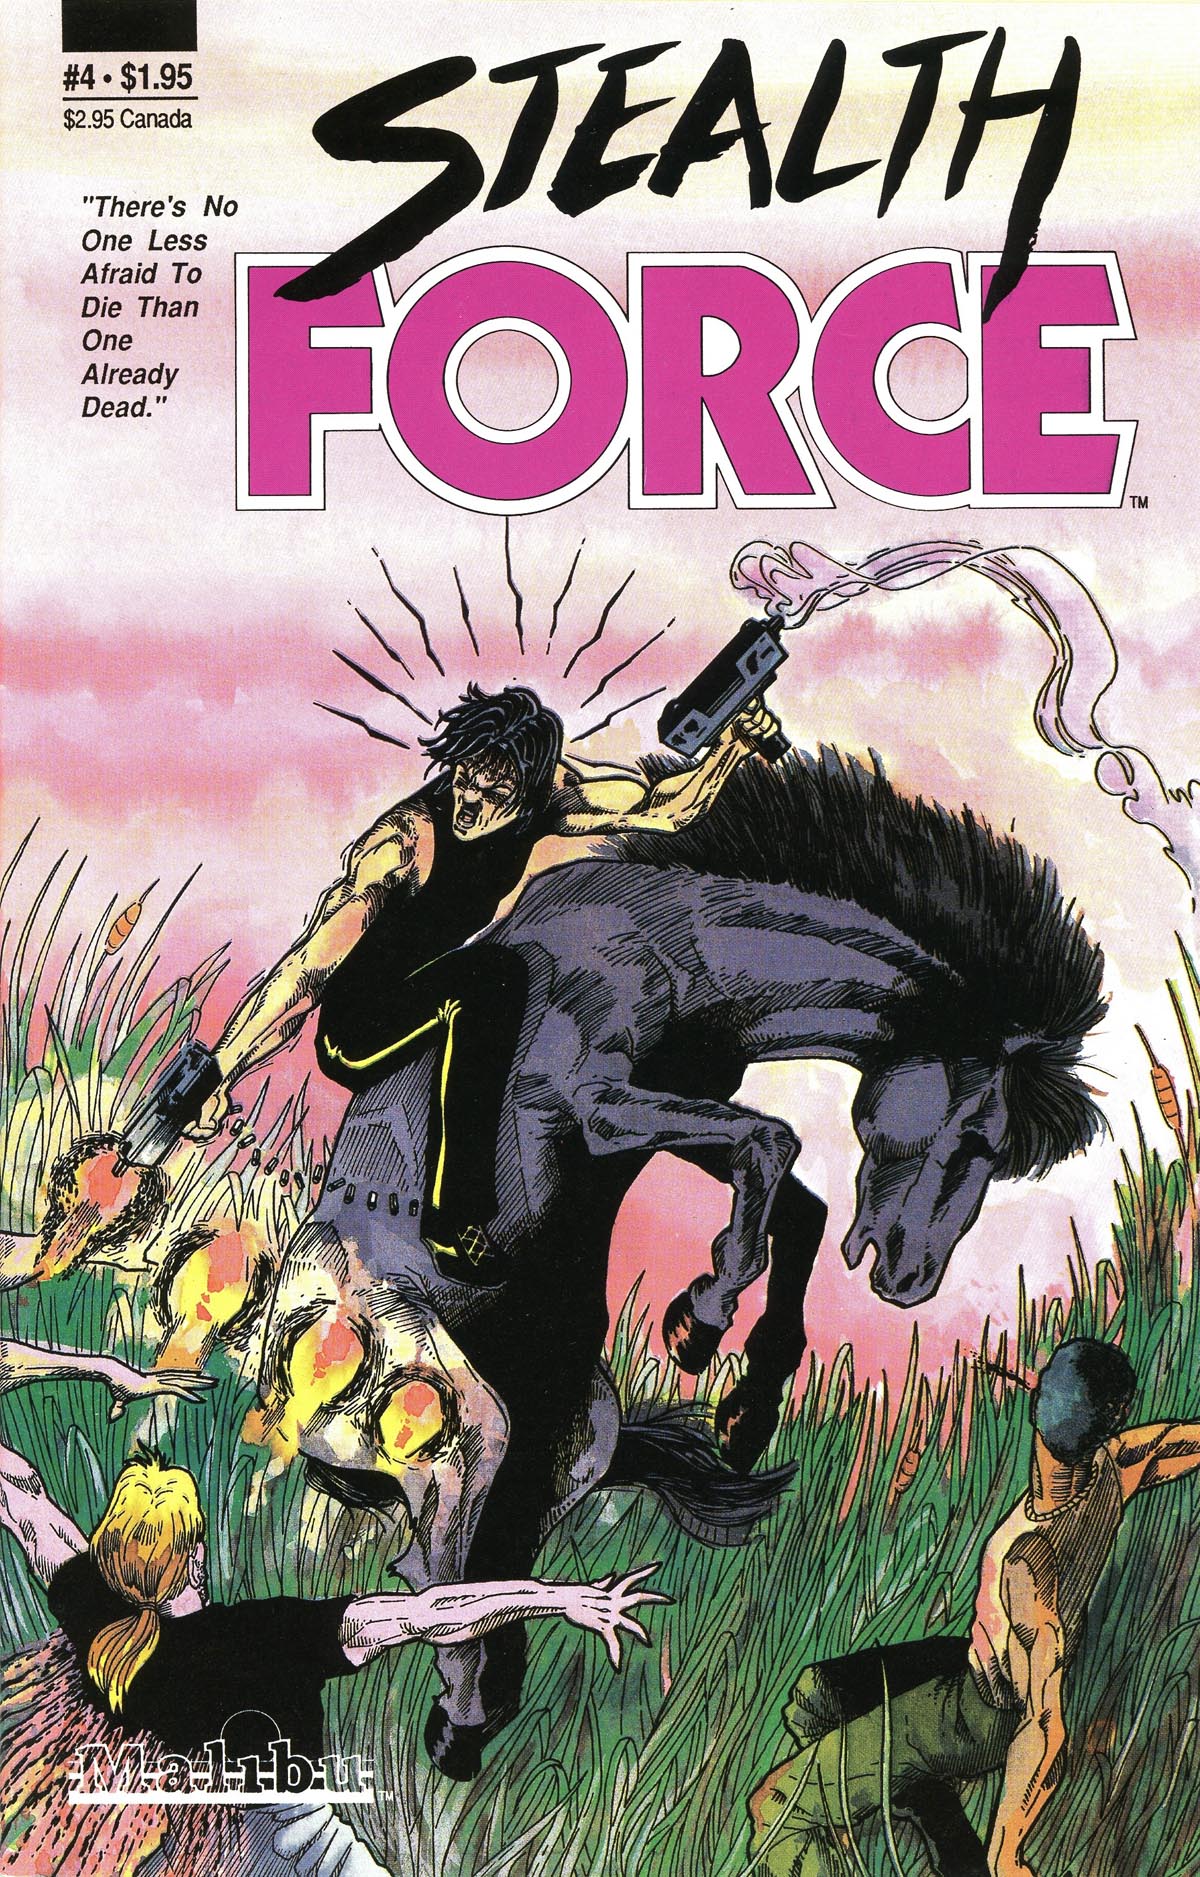 Read online Stealth Force comic -  Issue #4 - 1